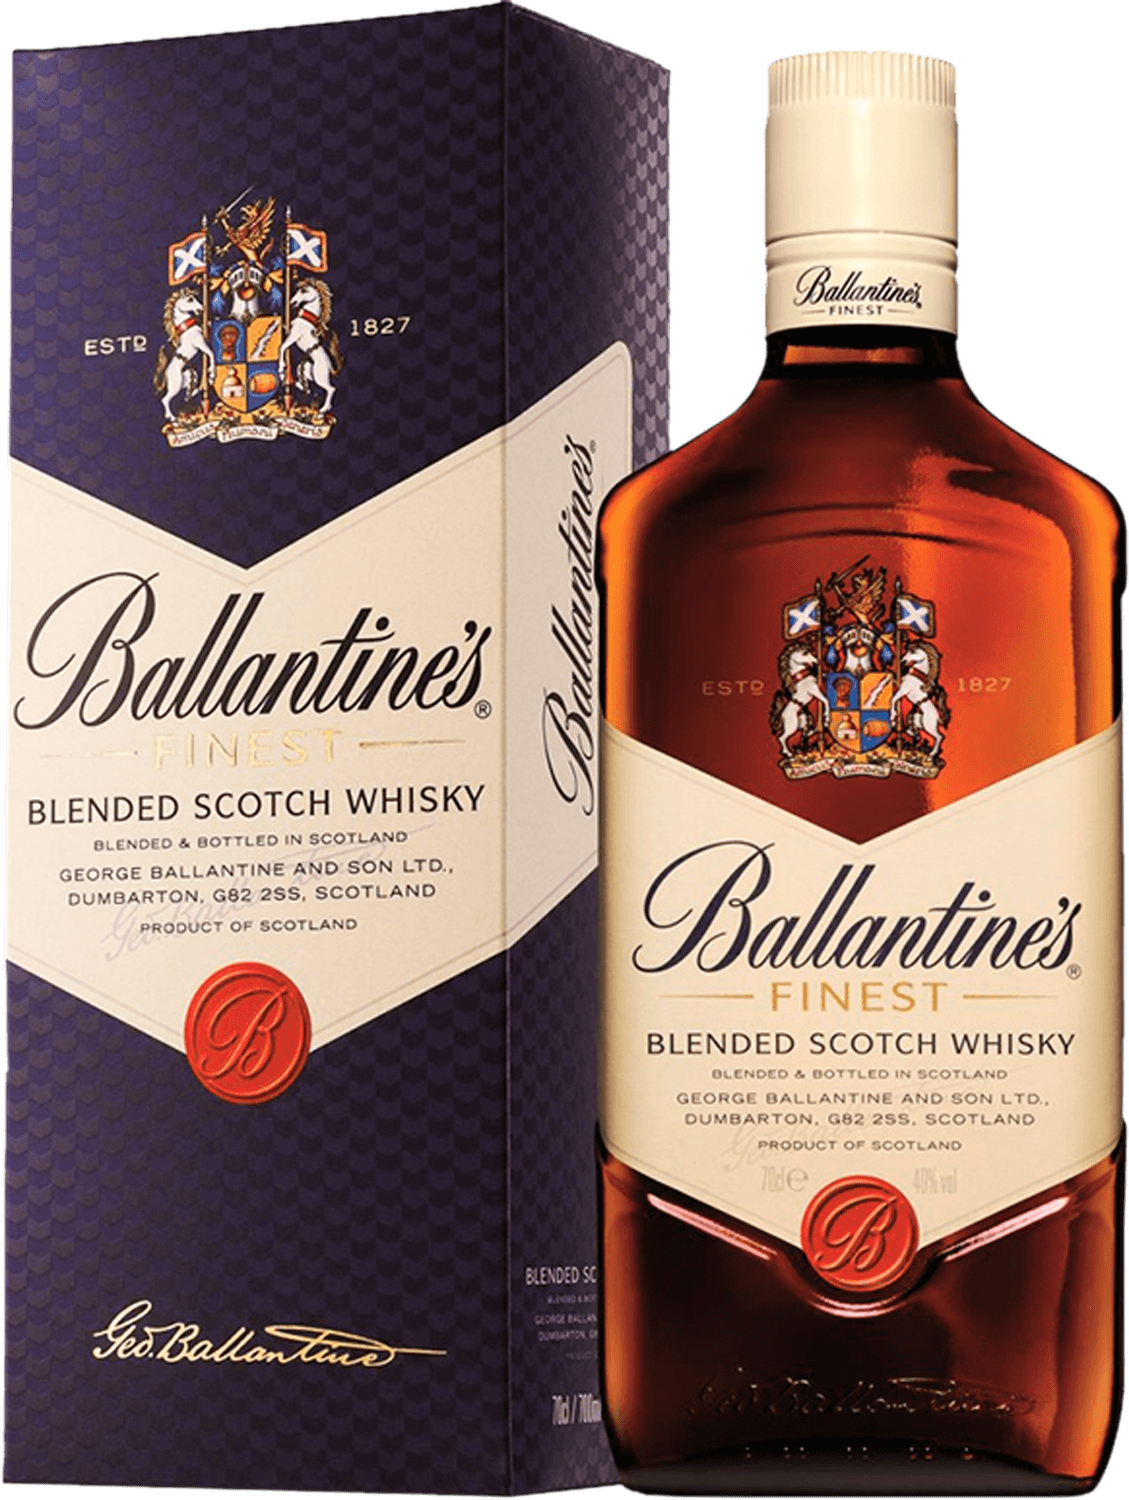 Ballantine's Finest blended scotch whisky (gift box) compass box rogues banquet blended scotch whisky gift box